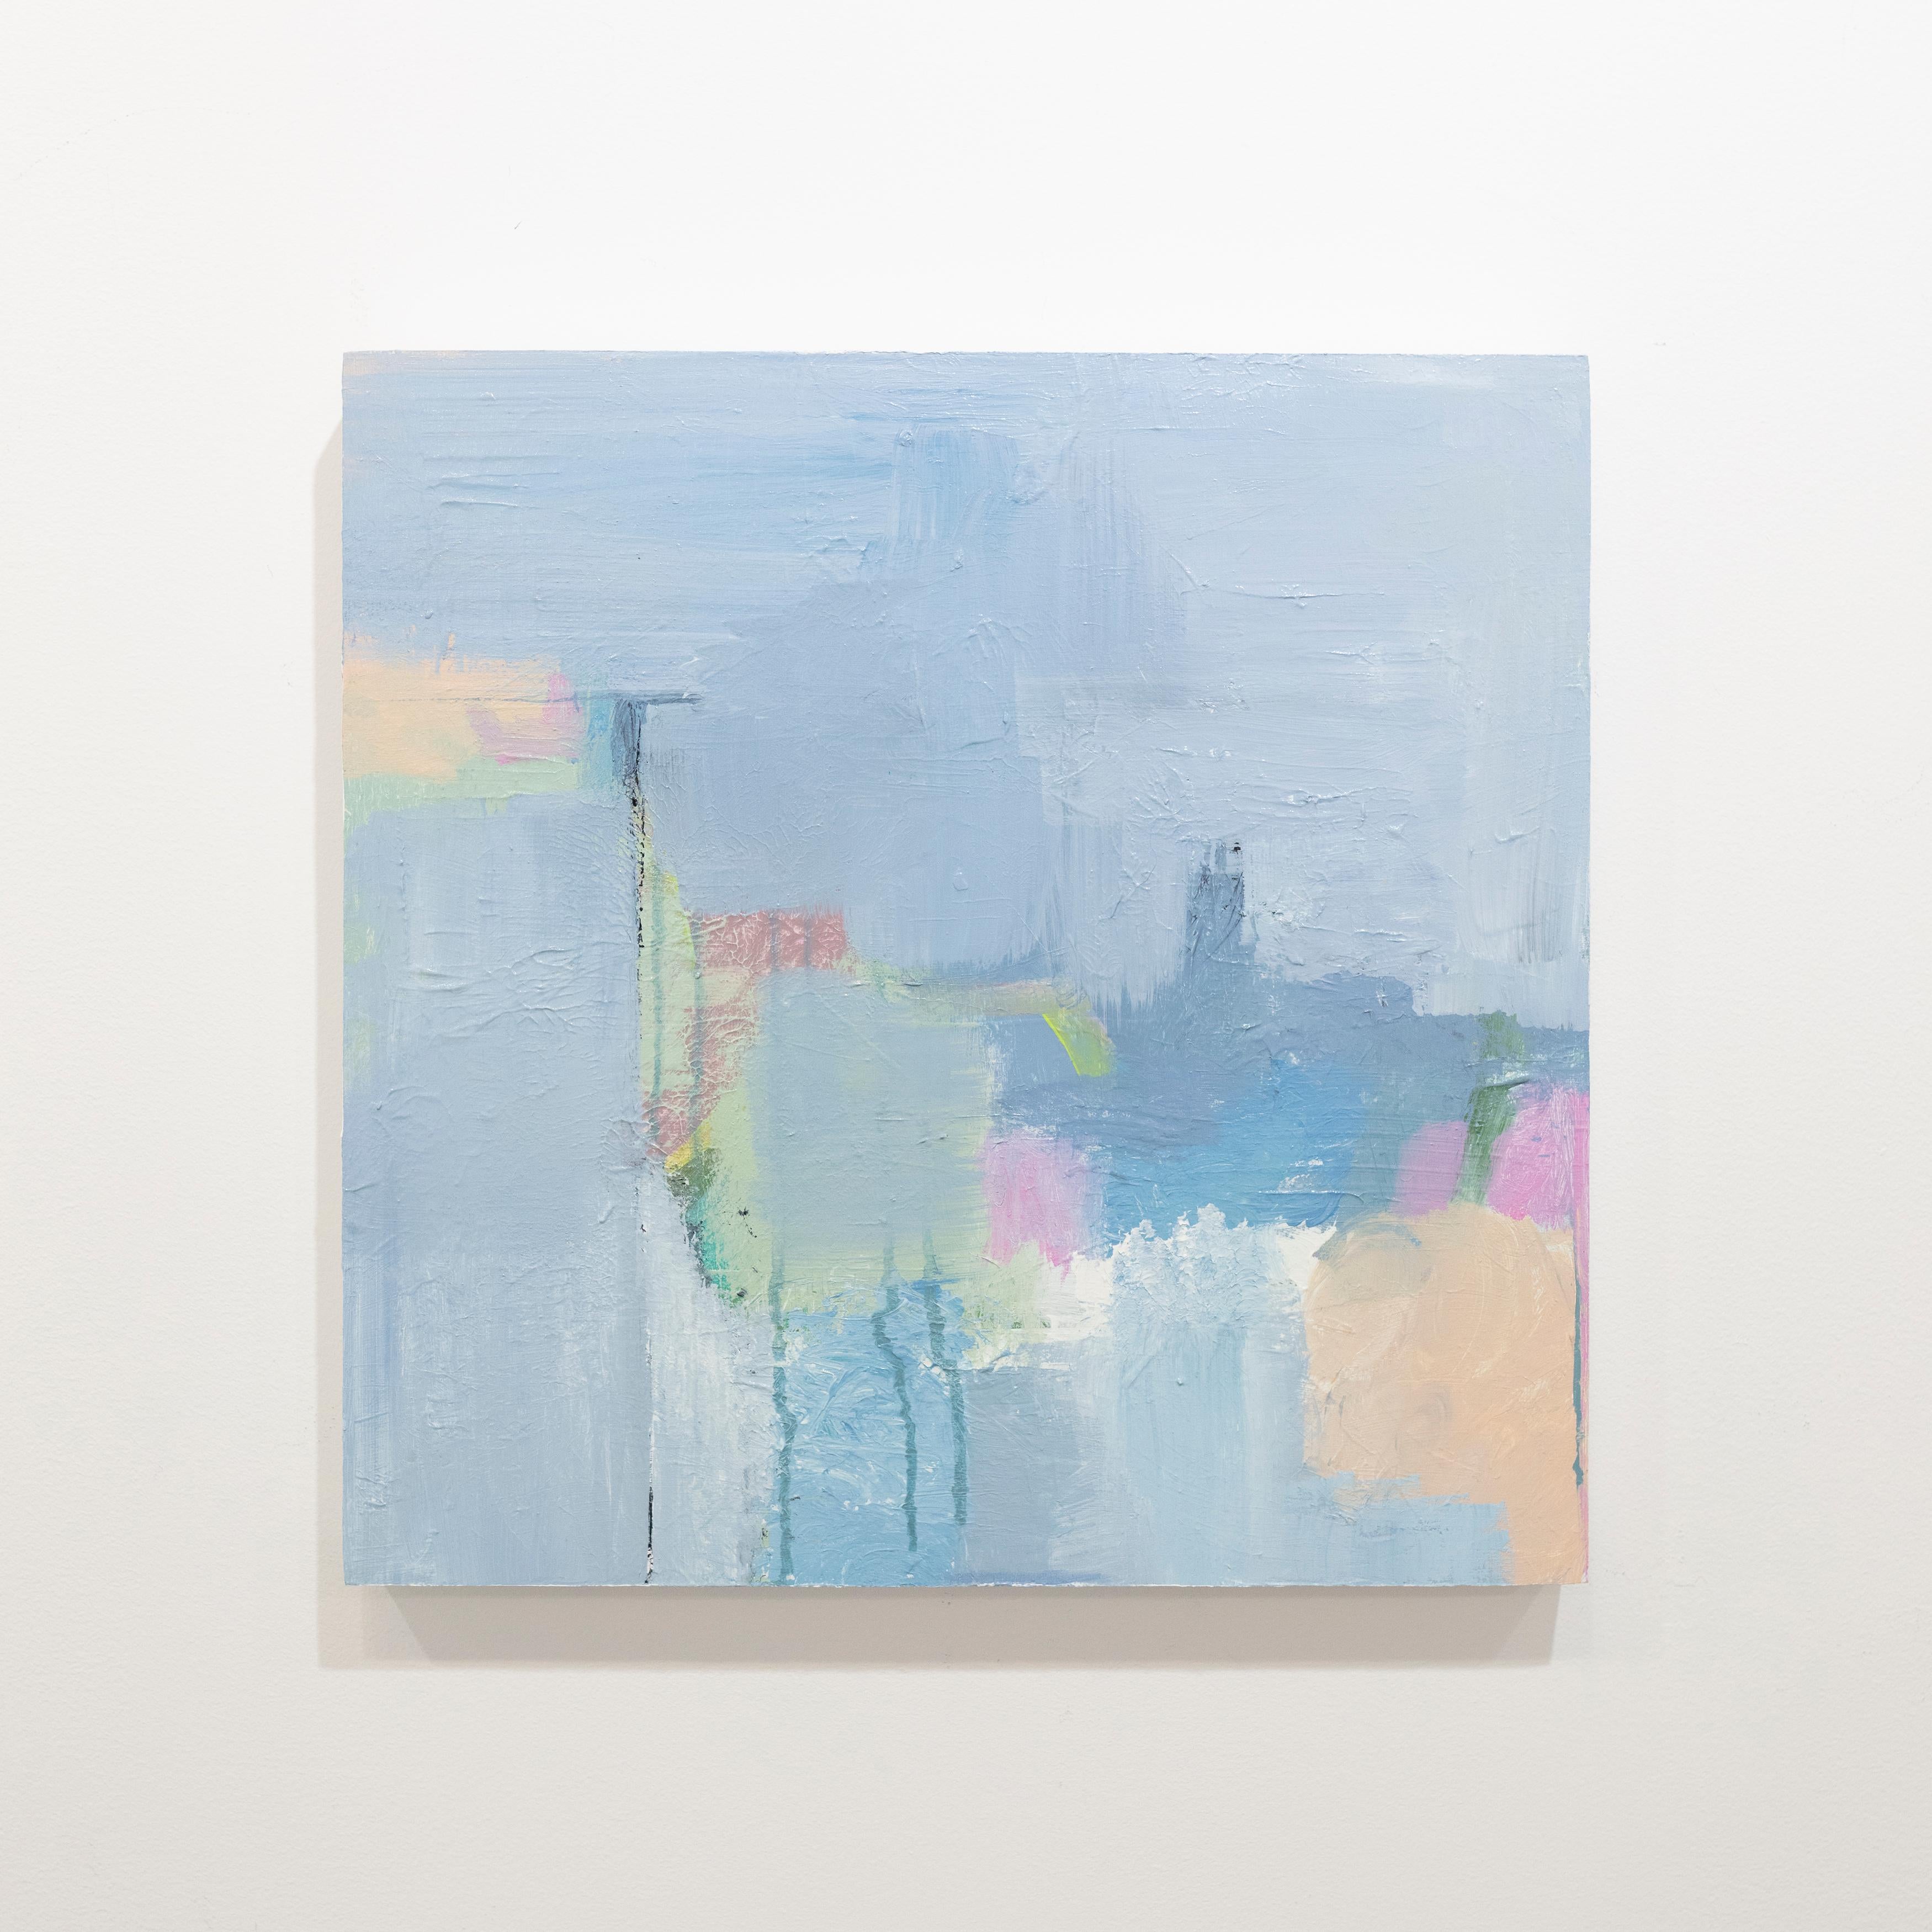 This abstract painting by Sue De Chiara is made with acrylic paint on panel. It features a light blue palette, with pastel pink, orange, and green accents and a layered, minimalist composition. The painting measures 18" x 18" and has clean, white